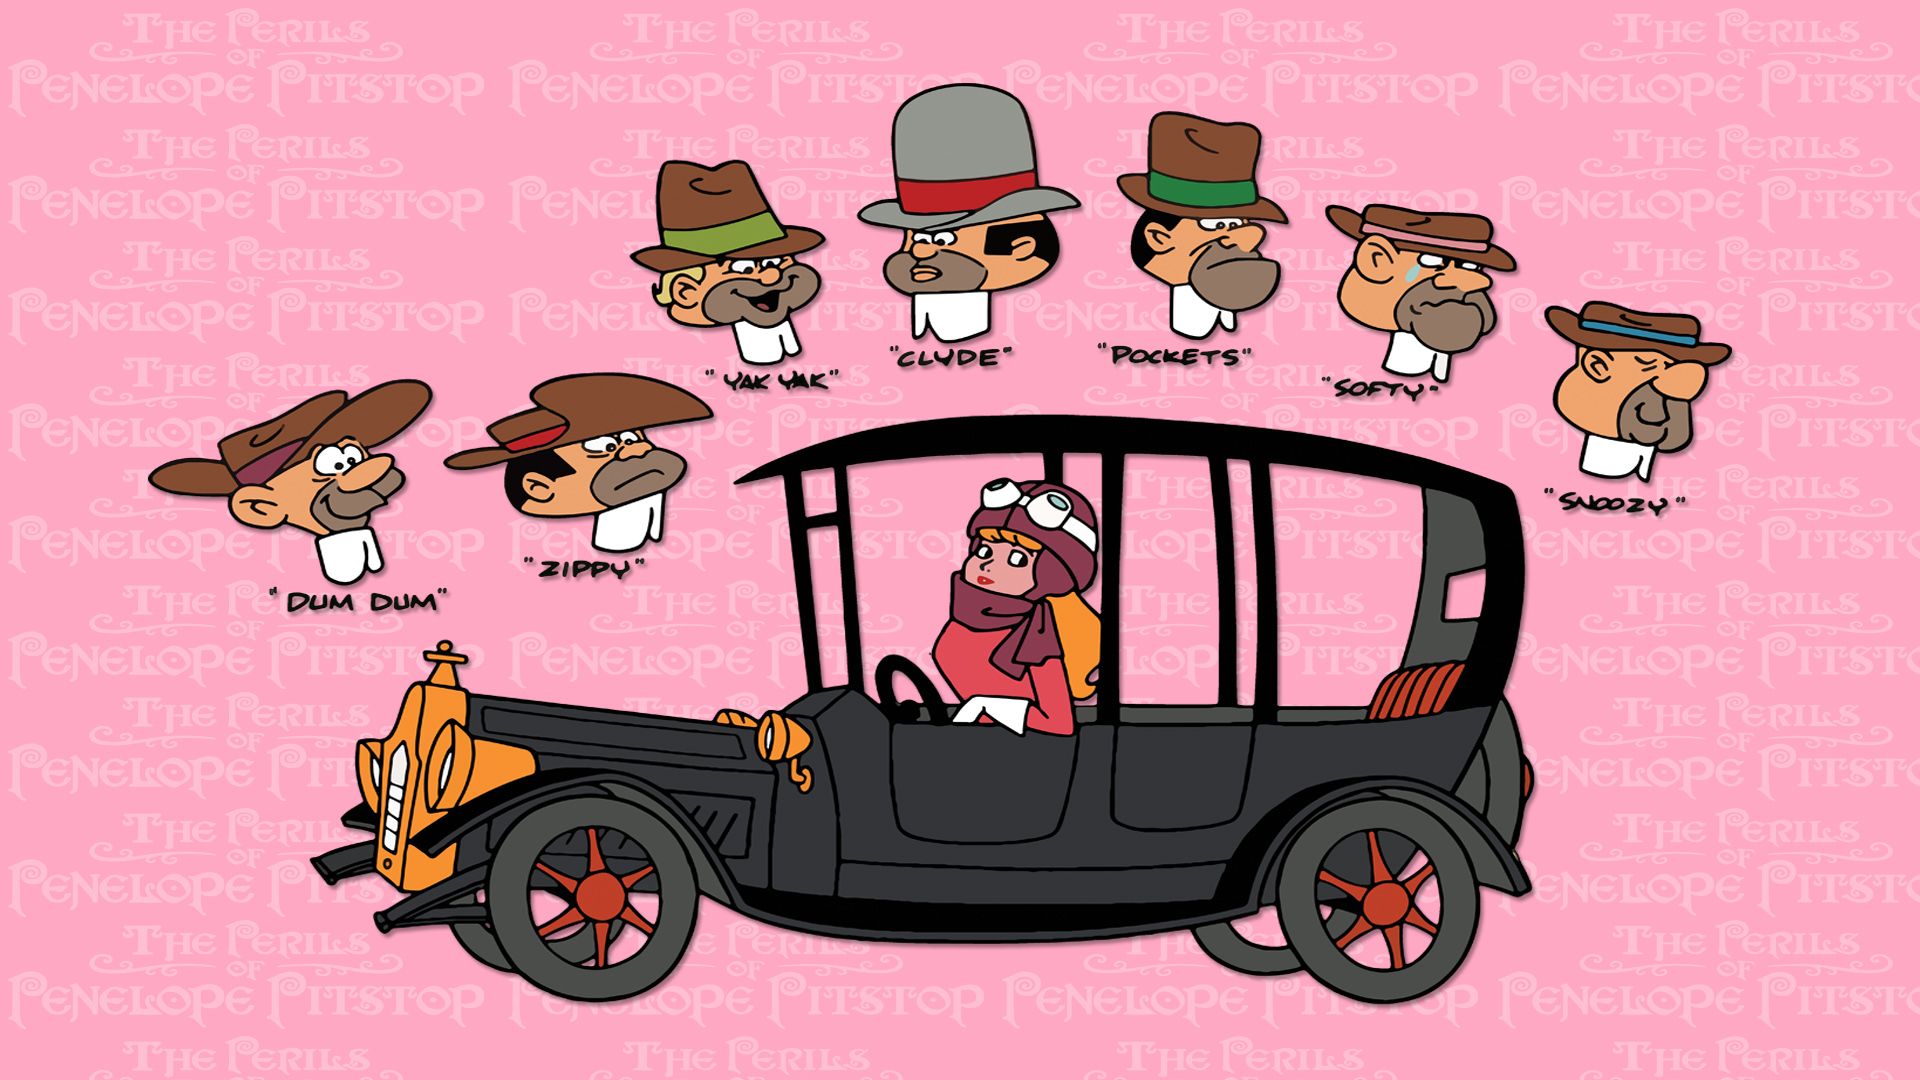 The Perils of Penelope Pitstop background